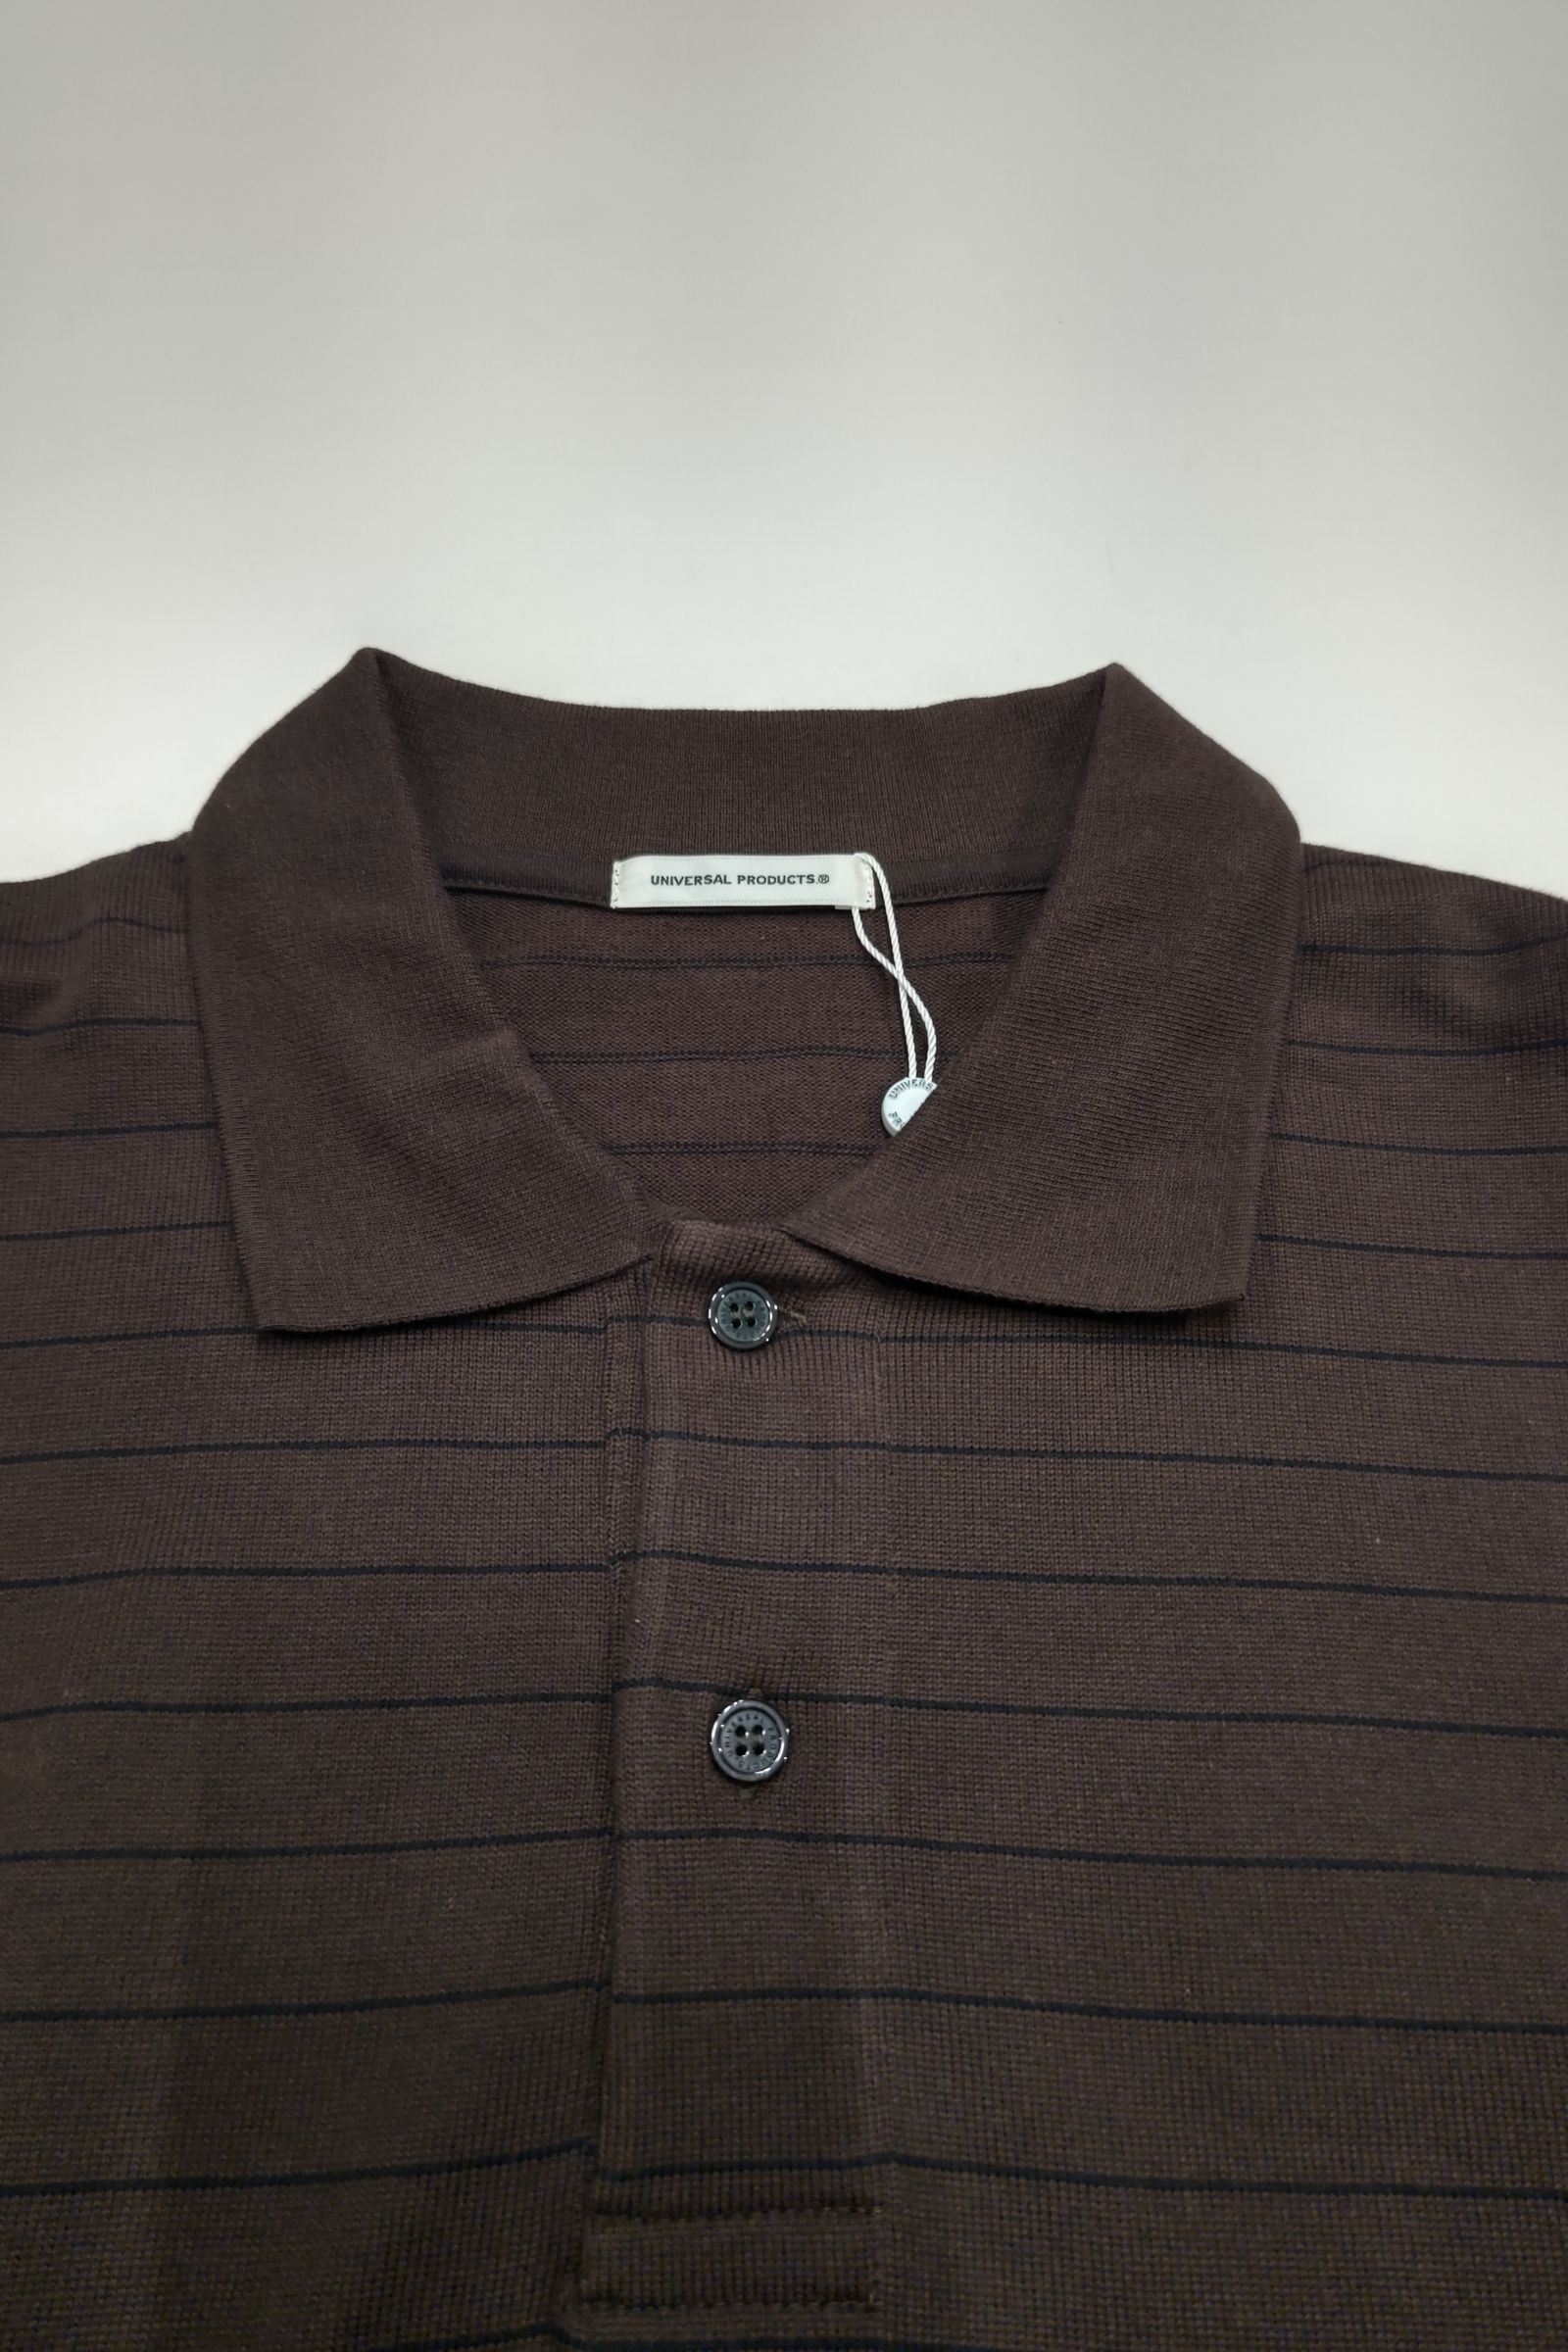 UNIVERSAL PRODUCTS - border l/s polo - brown-22aw men 